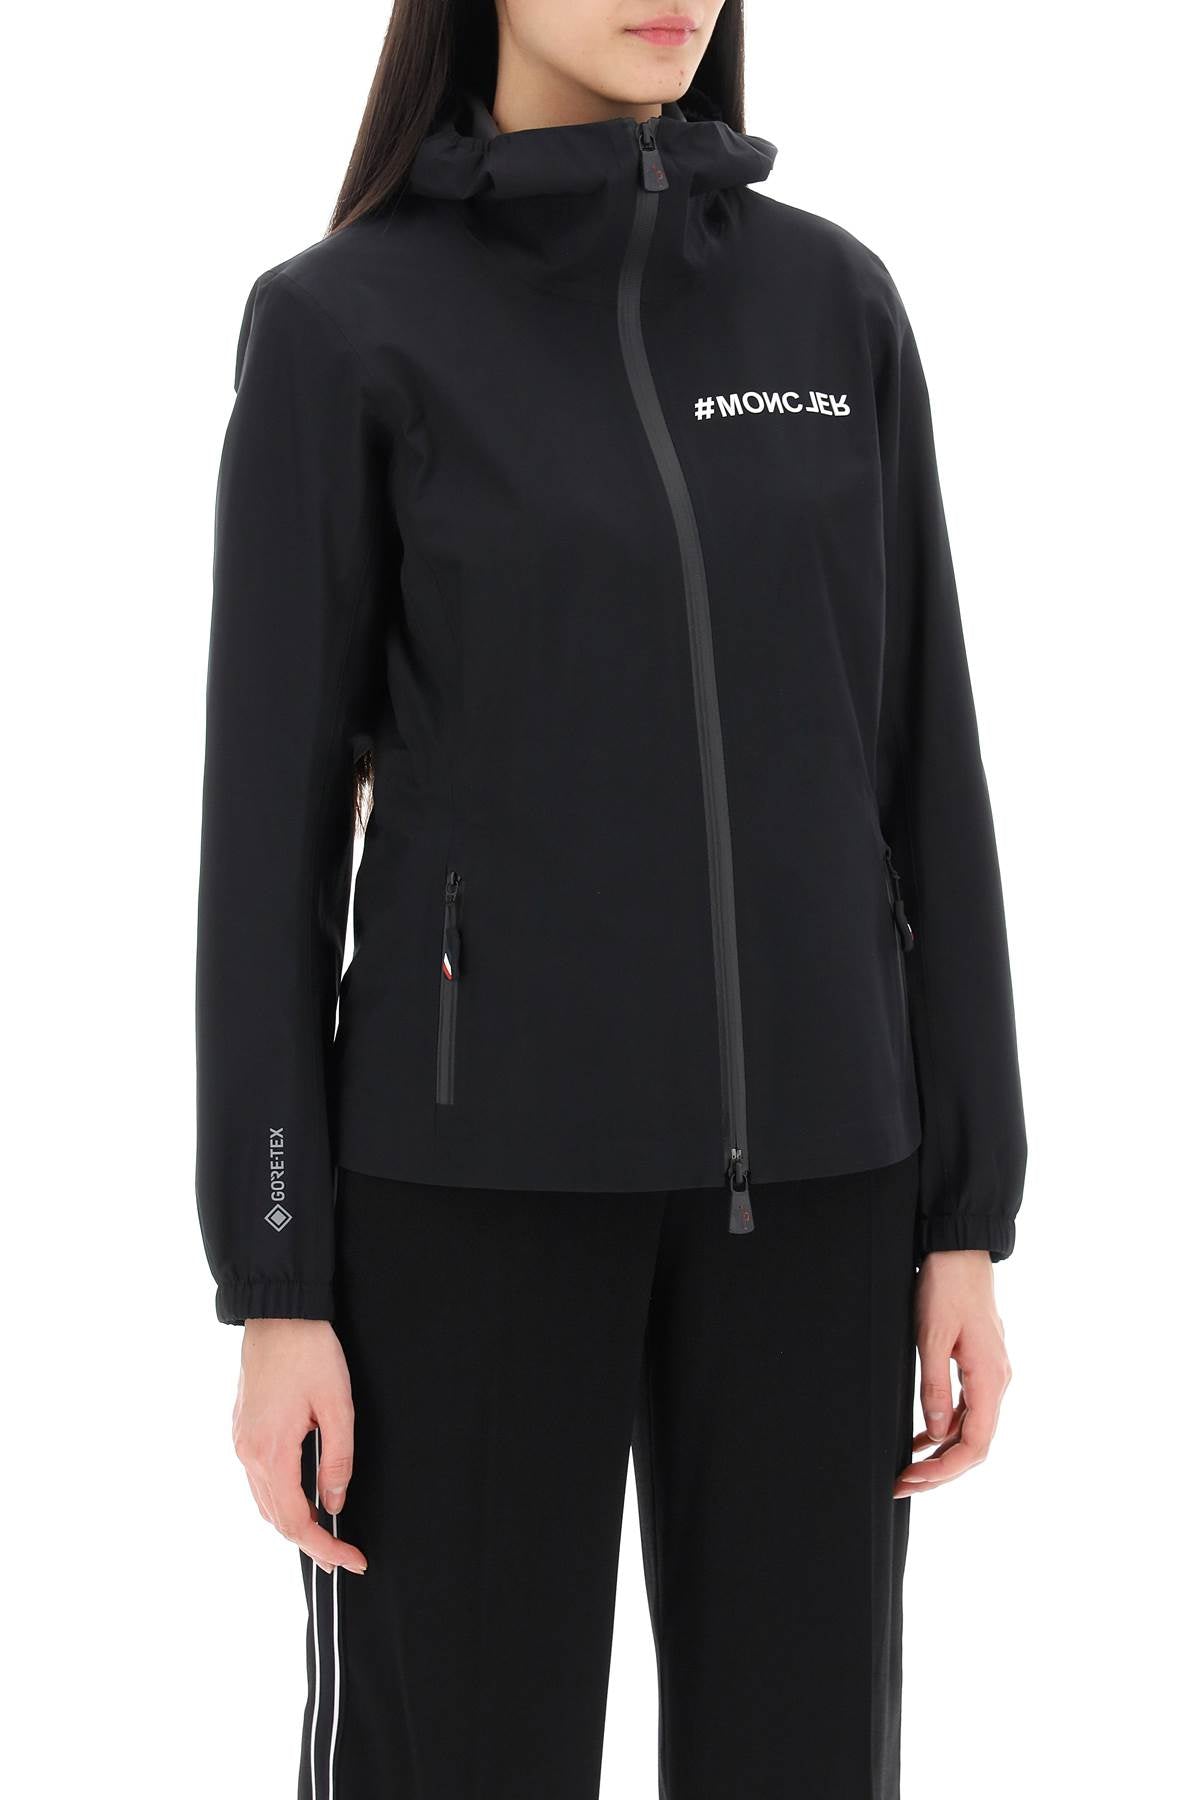 MONCLER GRENOBLE Black Lightweight Jacket for Women - SS24 Collection